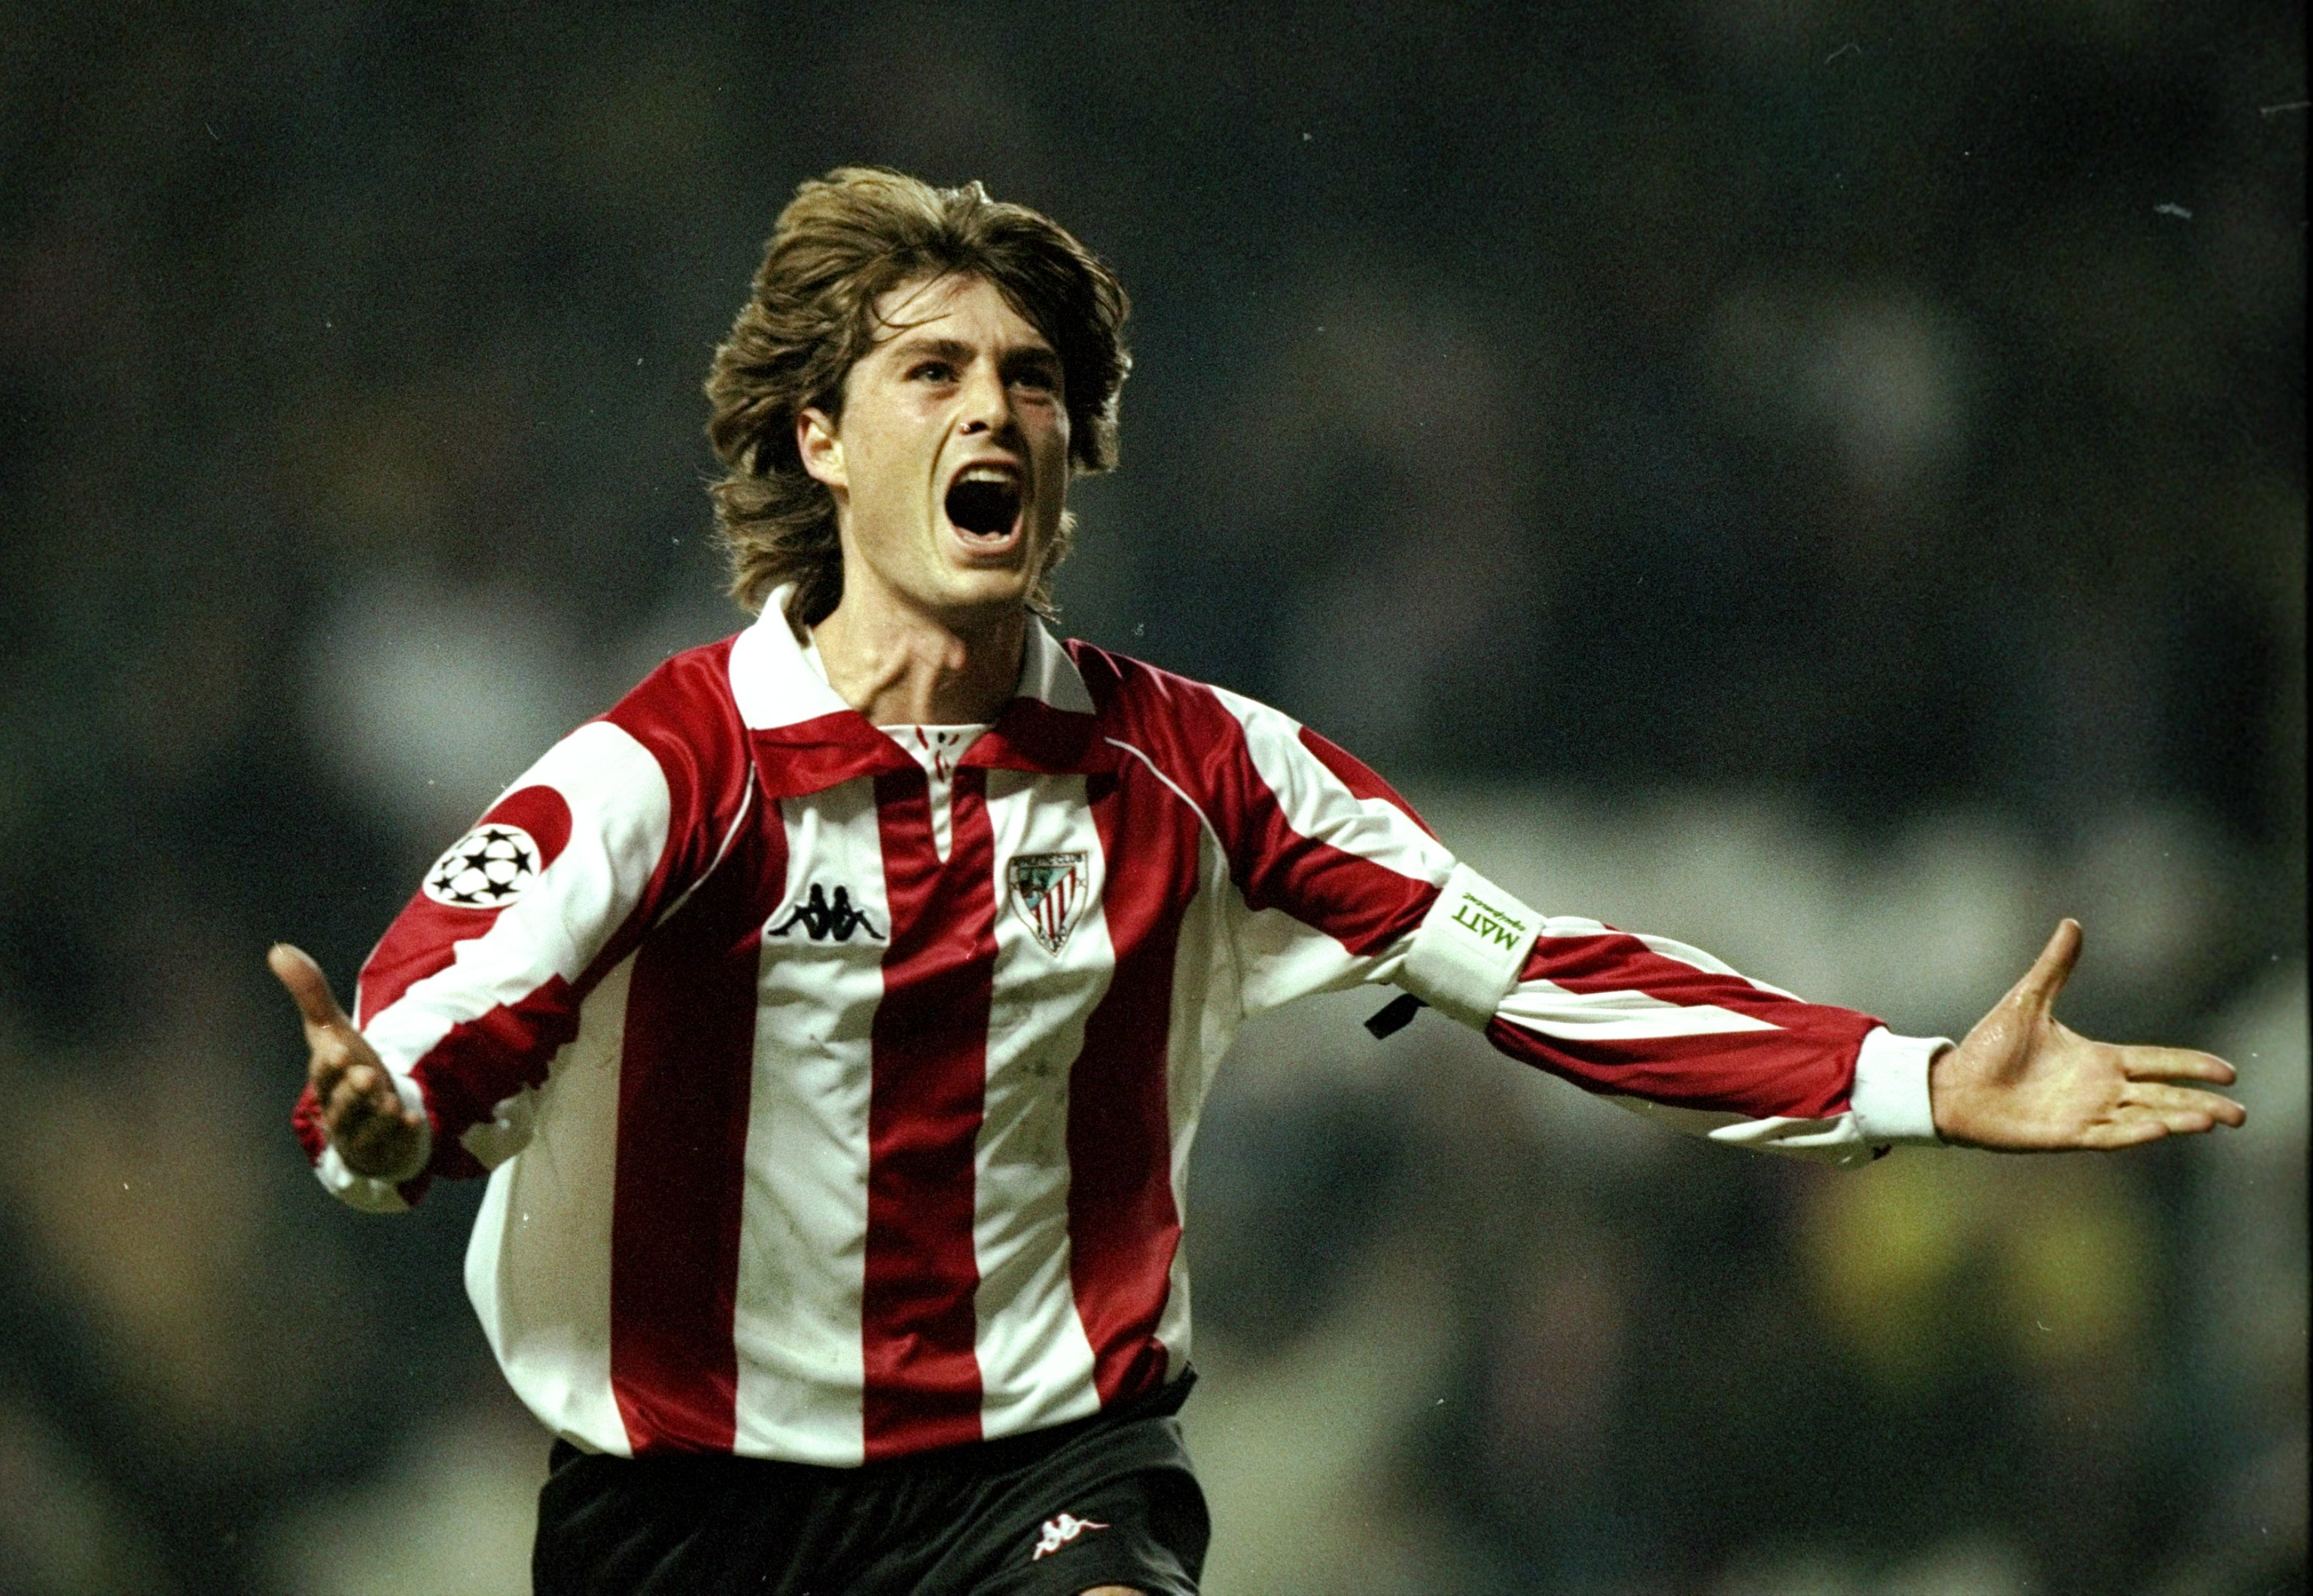 Julen Guerrero celebrates after scoring for Athletic Club against Galatasaray in the Champions League in 1998.